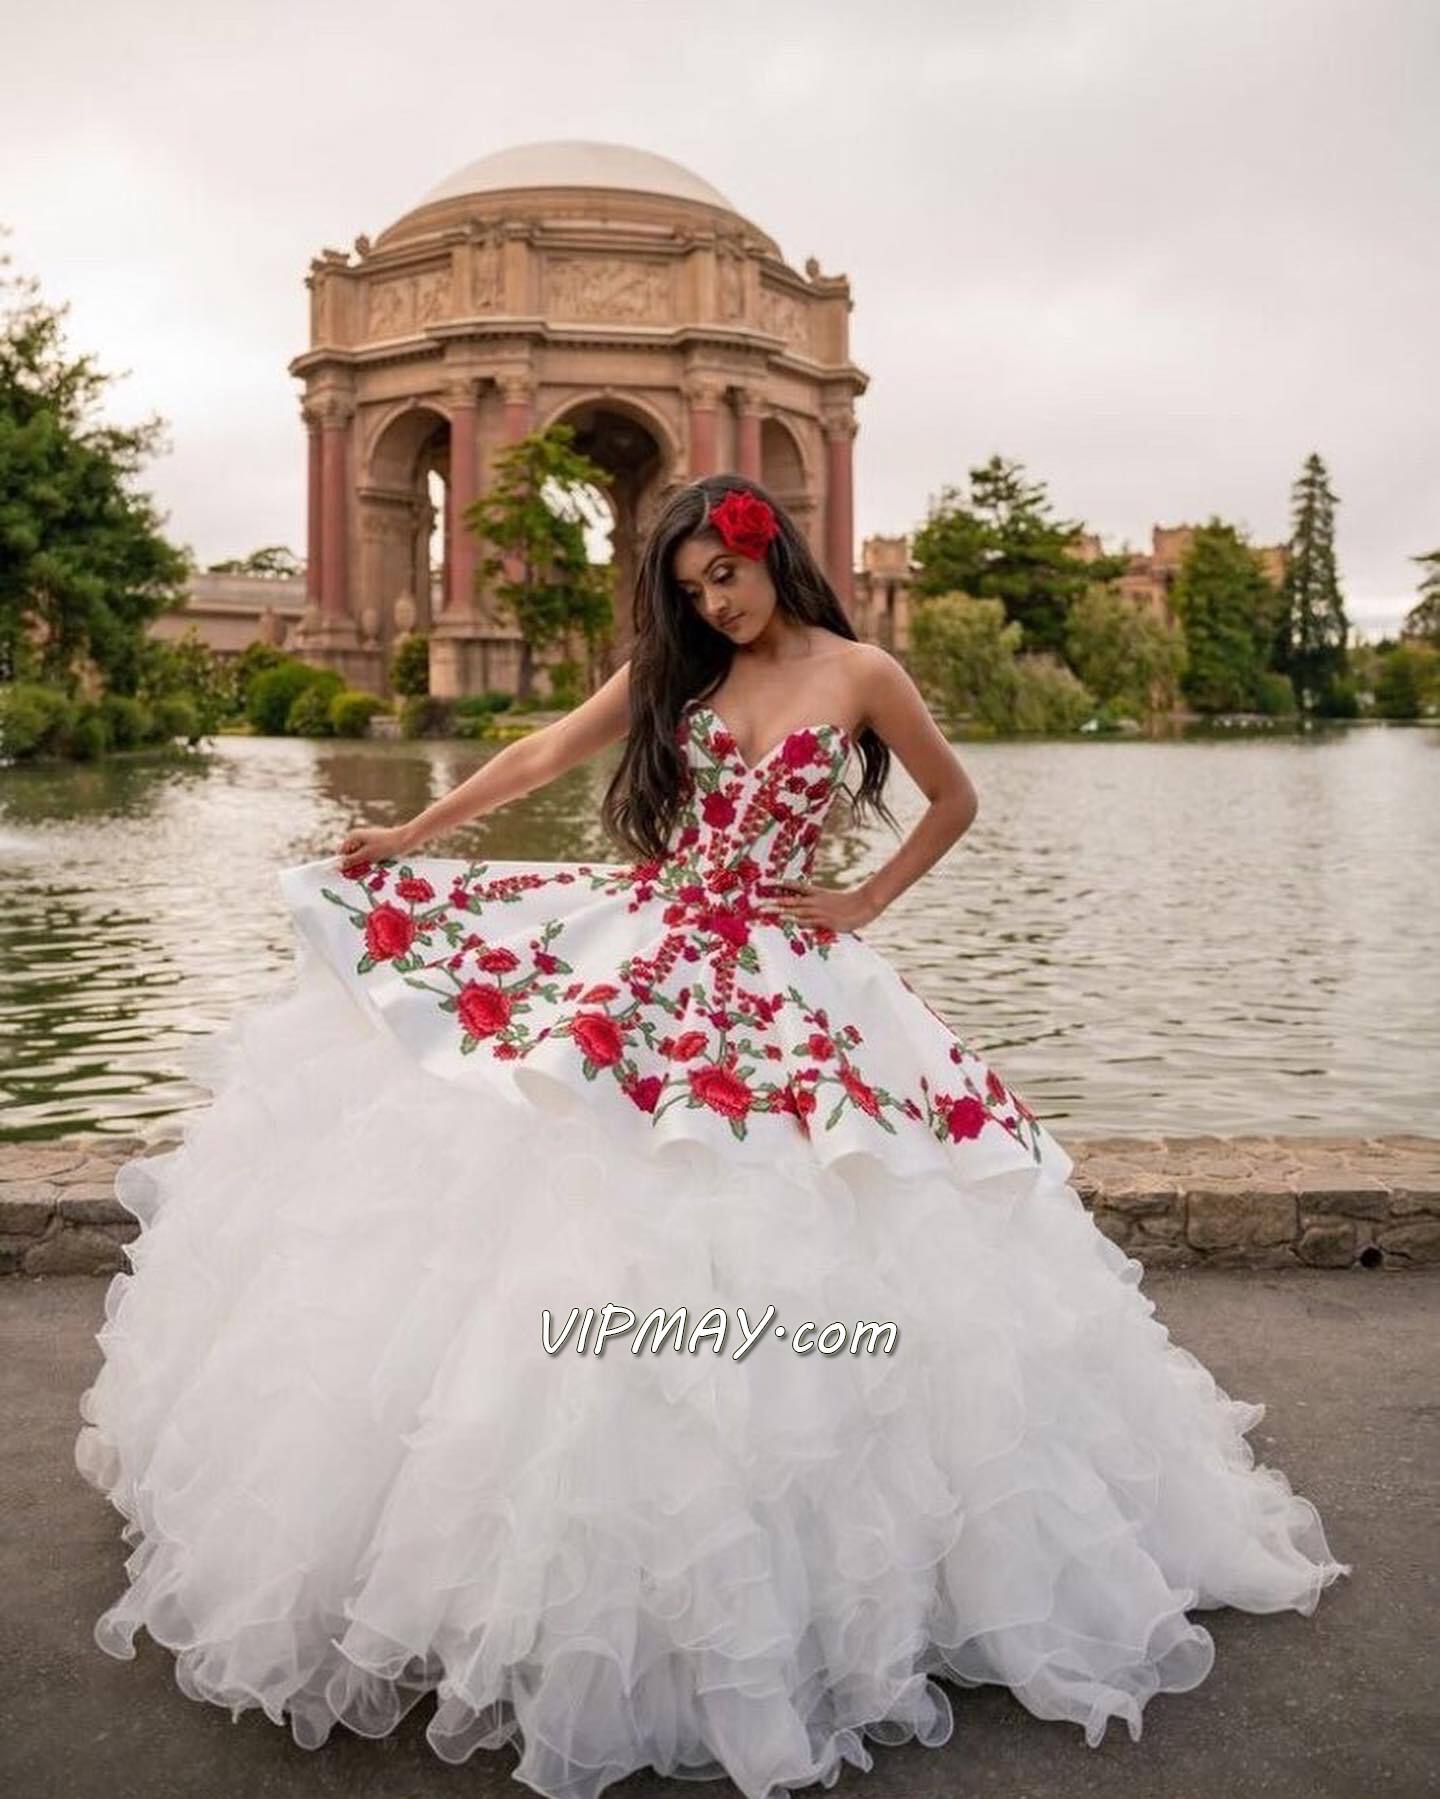 sweetheart sweet sixteen dress,strapless sweetheart quinceanera dress,red and white quinceanera dress,sweet sixteen dress with ruffles,floral embroidered quinceanera dress,quinceanera designers for dress,sweet 16 dress with embroidery,custom design quinceanera dress,